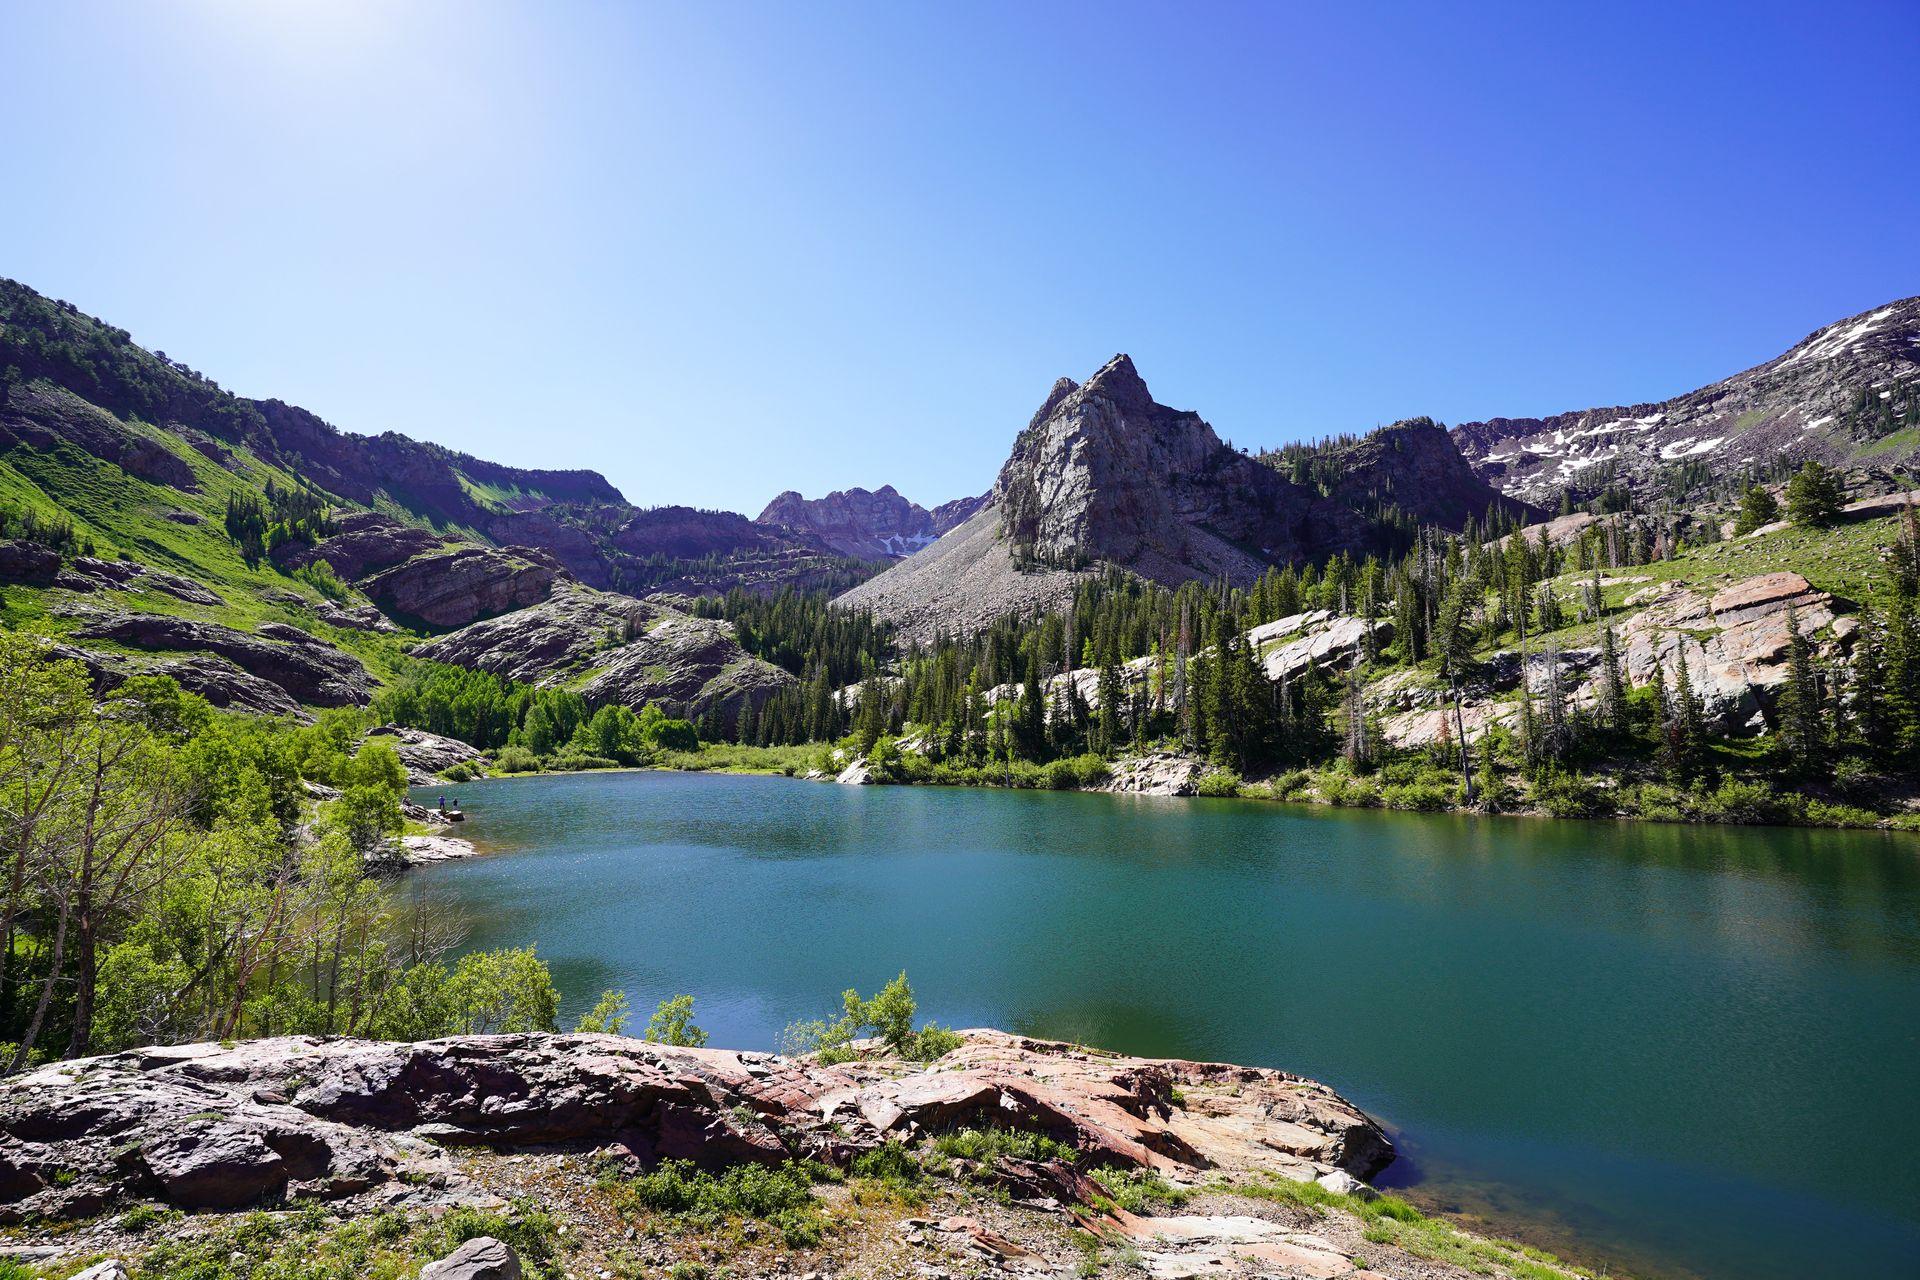 A view of Lake Blanche with a mountain on the opposite side of the lake. The lake is surrounded by rock and green trees.